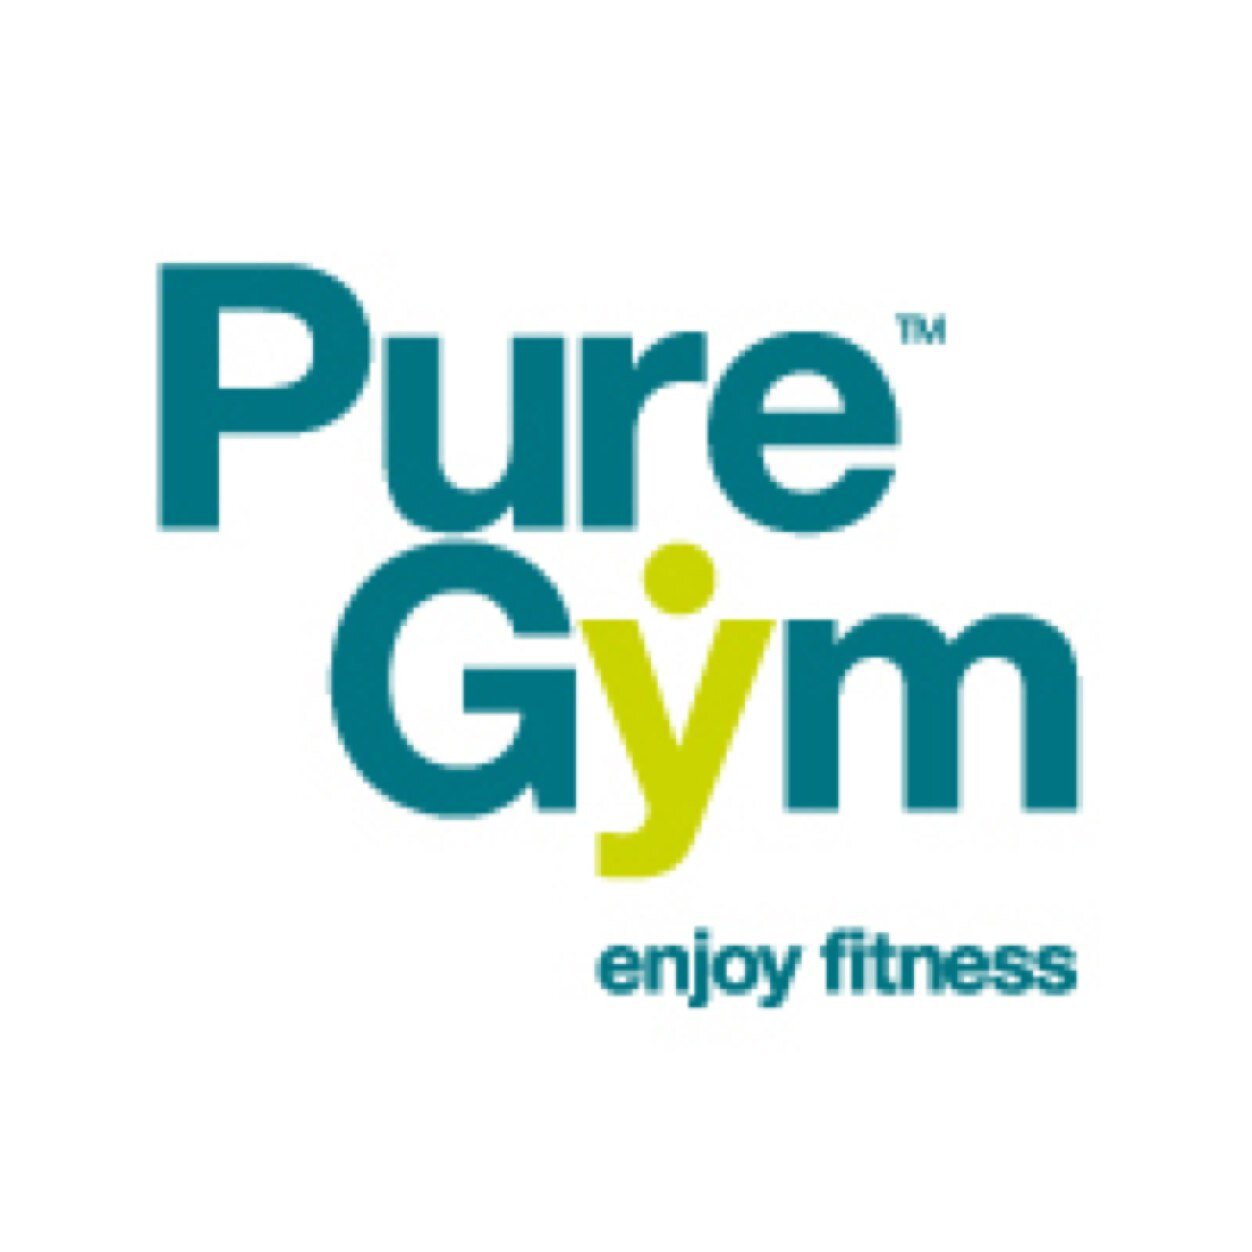 Pure Gym Walton on Thames, located in the heart shopping centre (above debenhams) *open 24/7 * over 50 free exercise classes a week * no contract *only £25.99